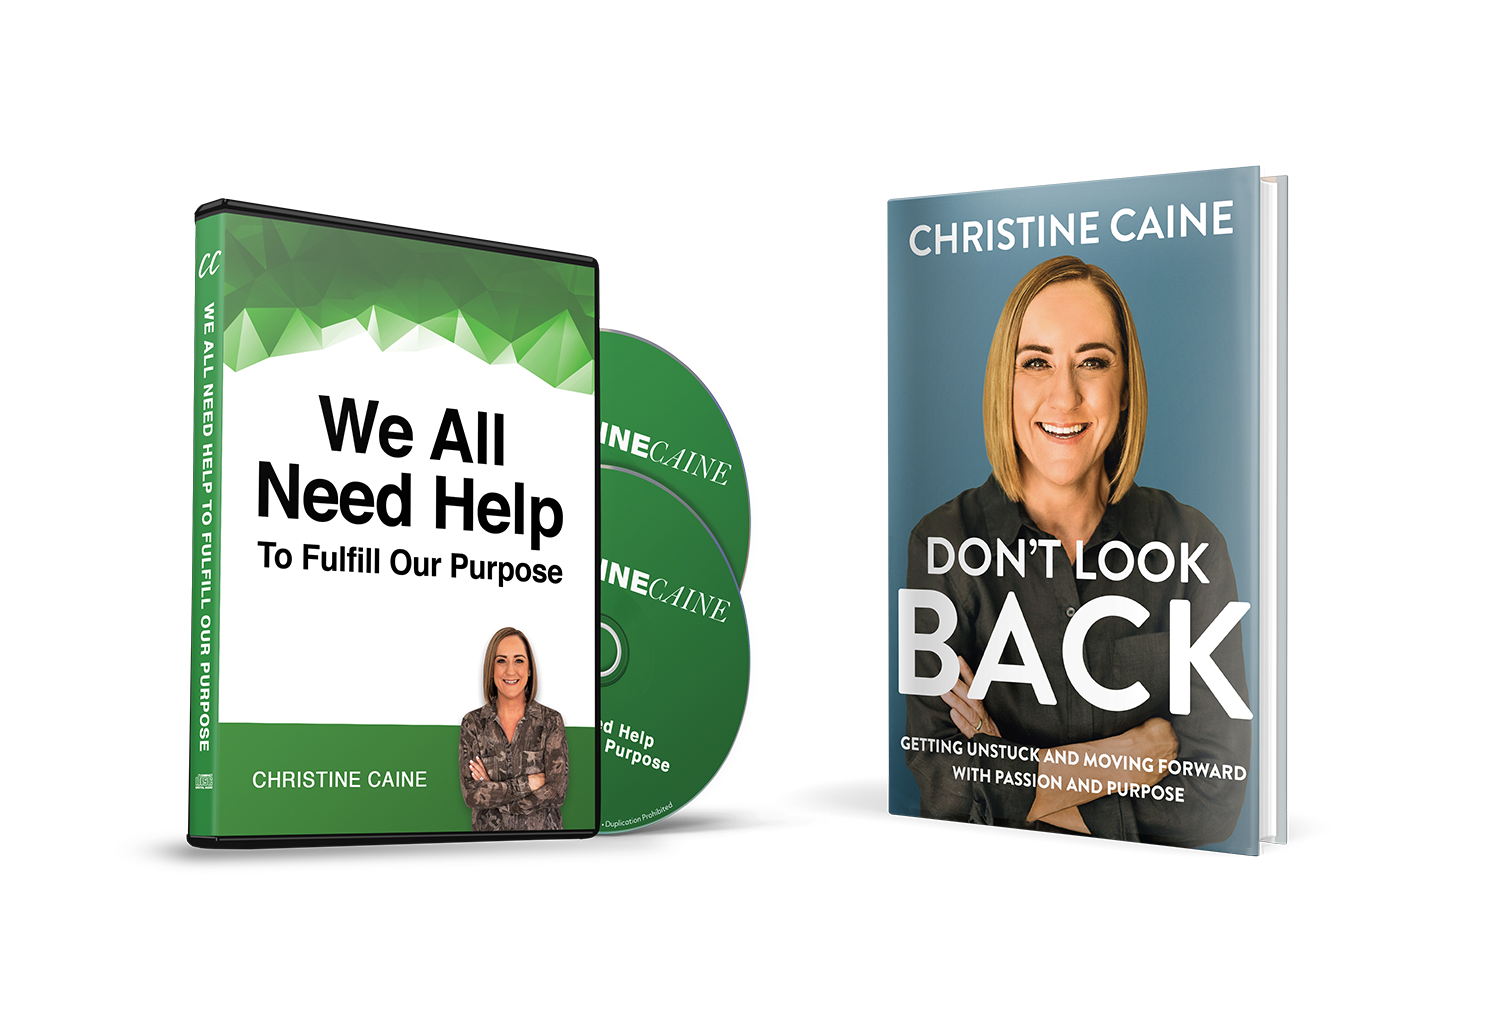 We All Need Help to Fulfill Our Purpose + Don't Look Back by Christine Caine by TBN